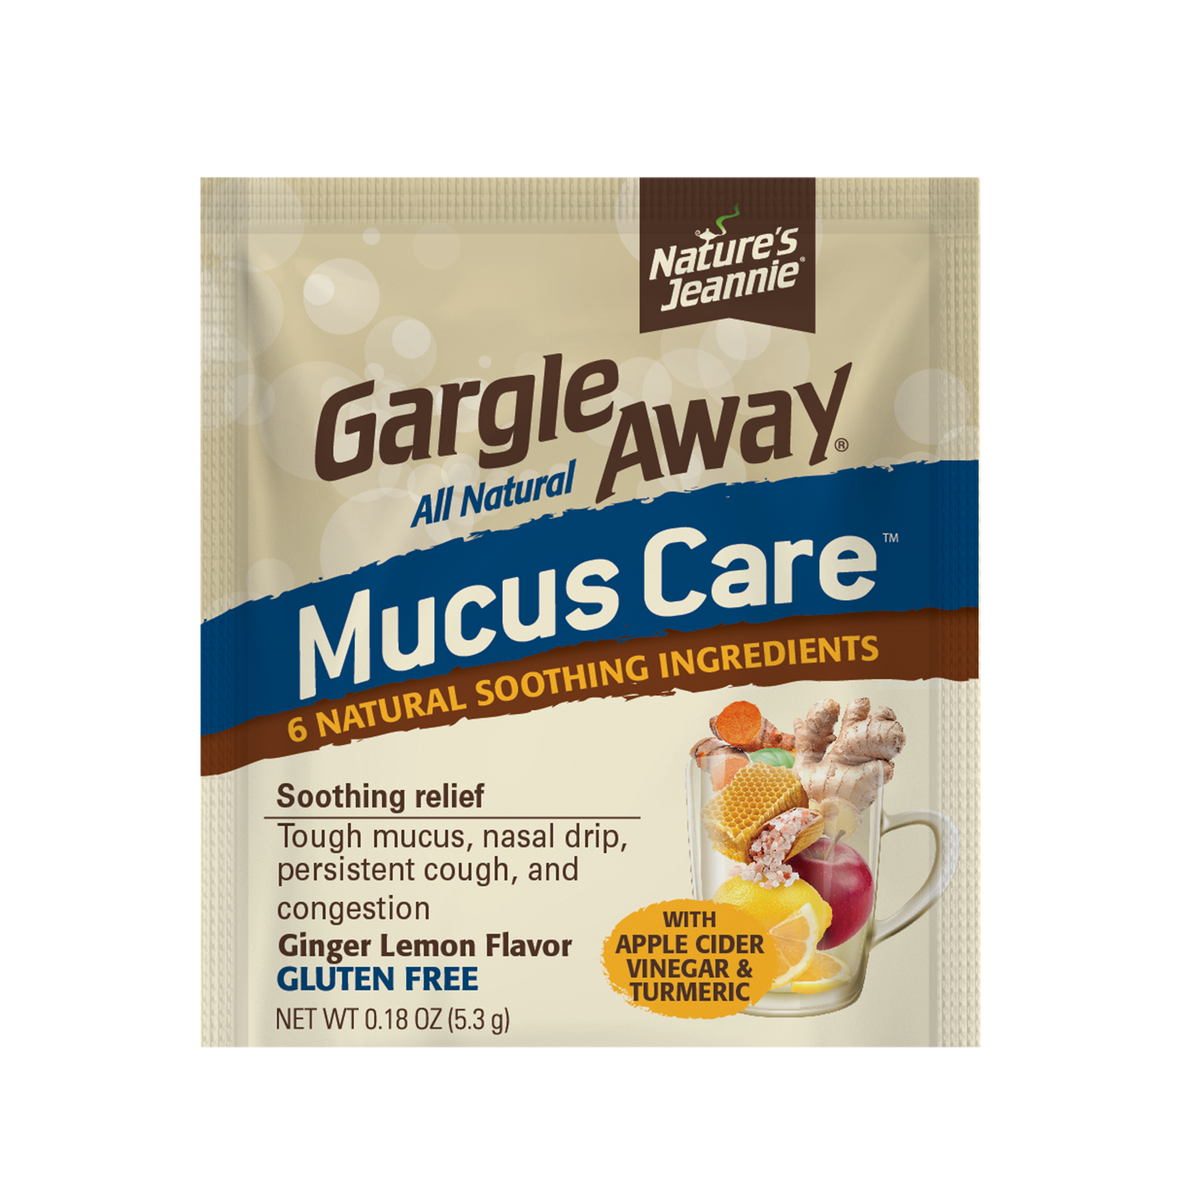 Close up image of the Gargle Away Mucus Care single-dose packet.